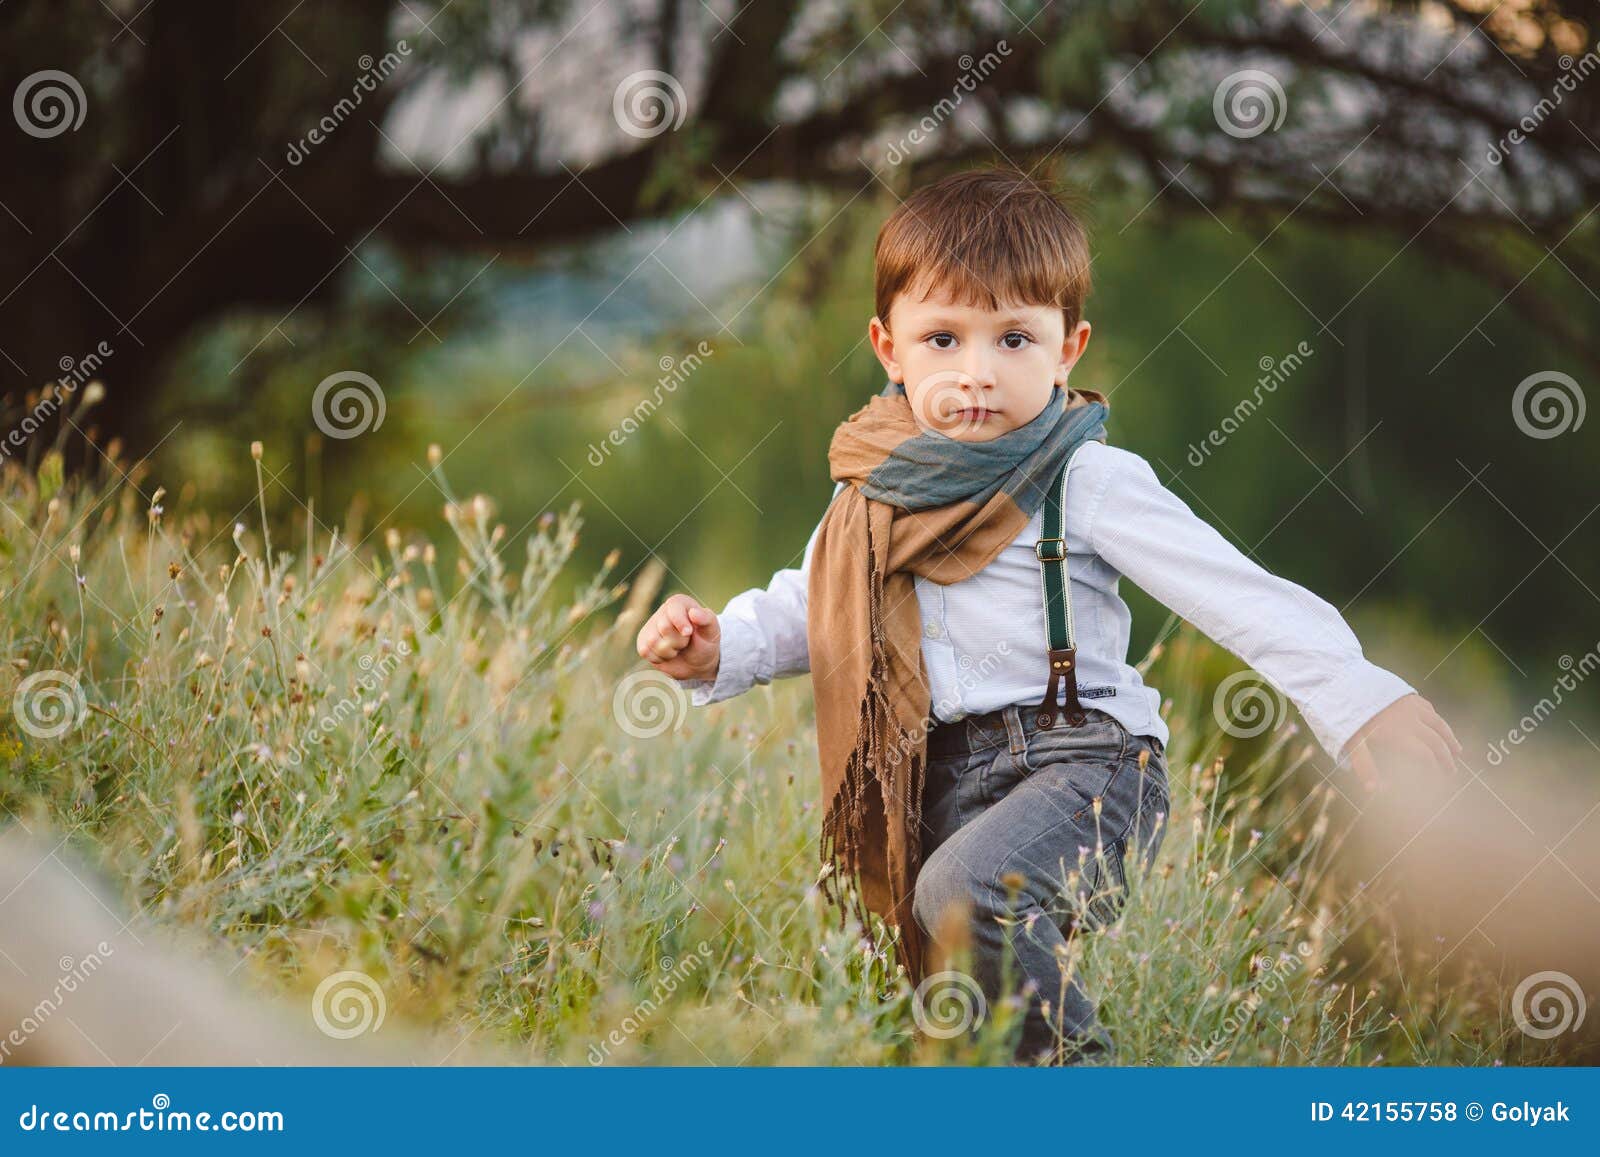 Cute Happy Boy on the Street Stock Photo - Image of male, funny ...